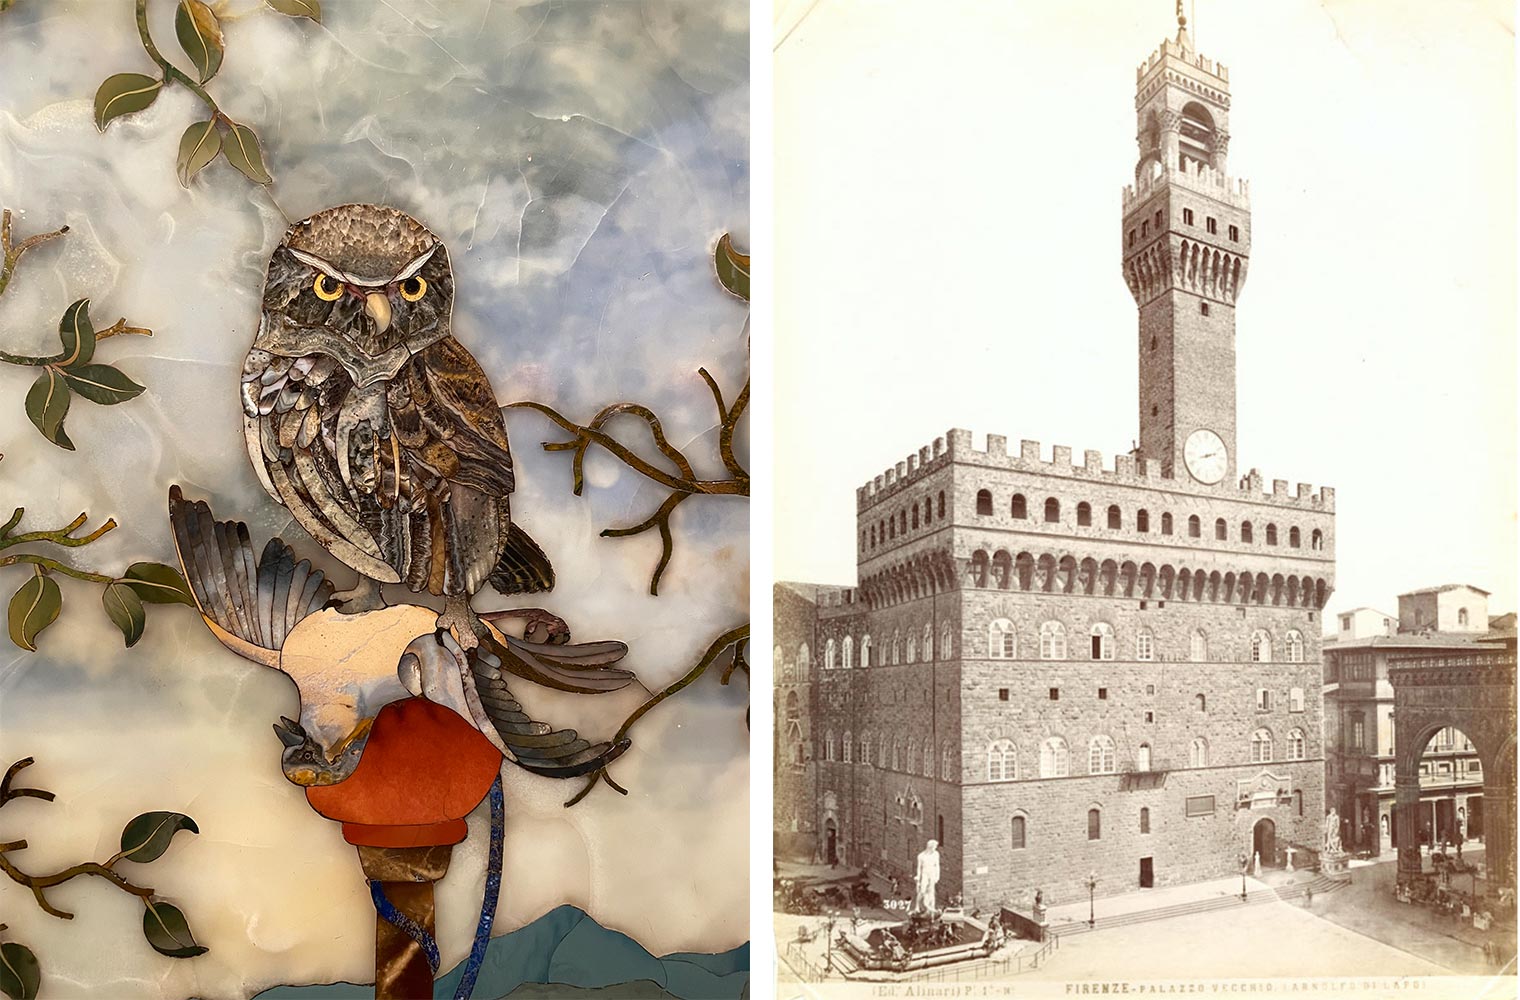 An owl and a large castle-like building